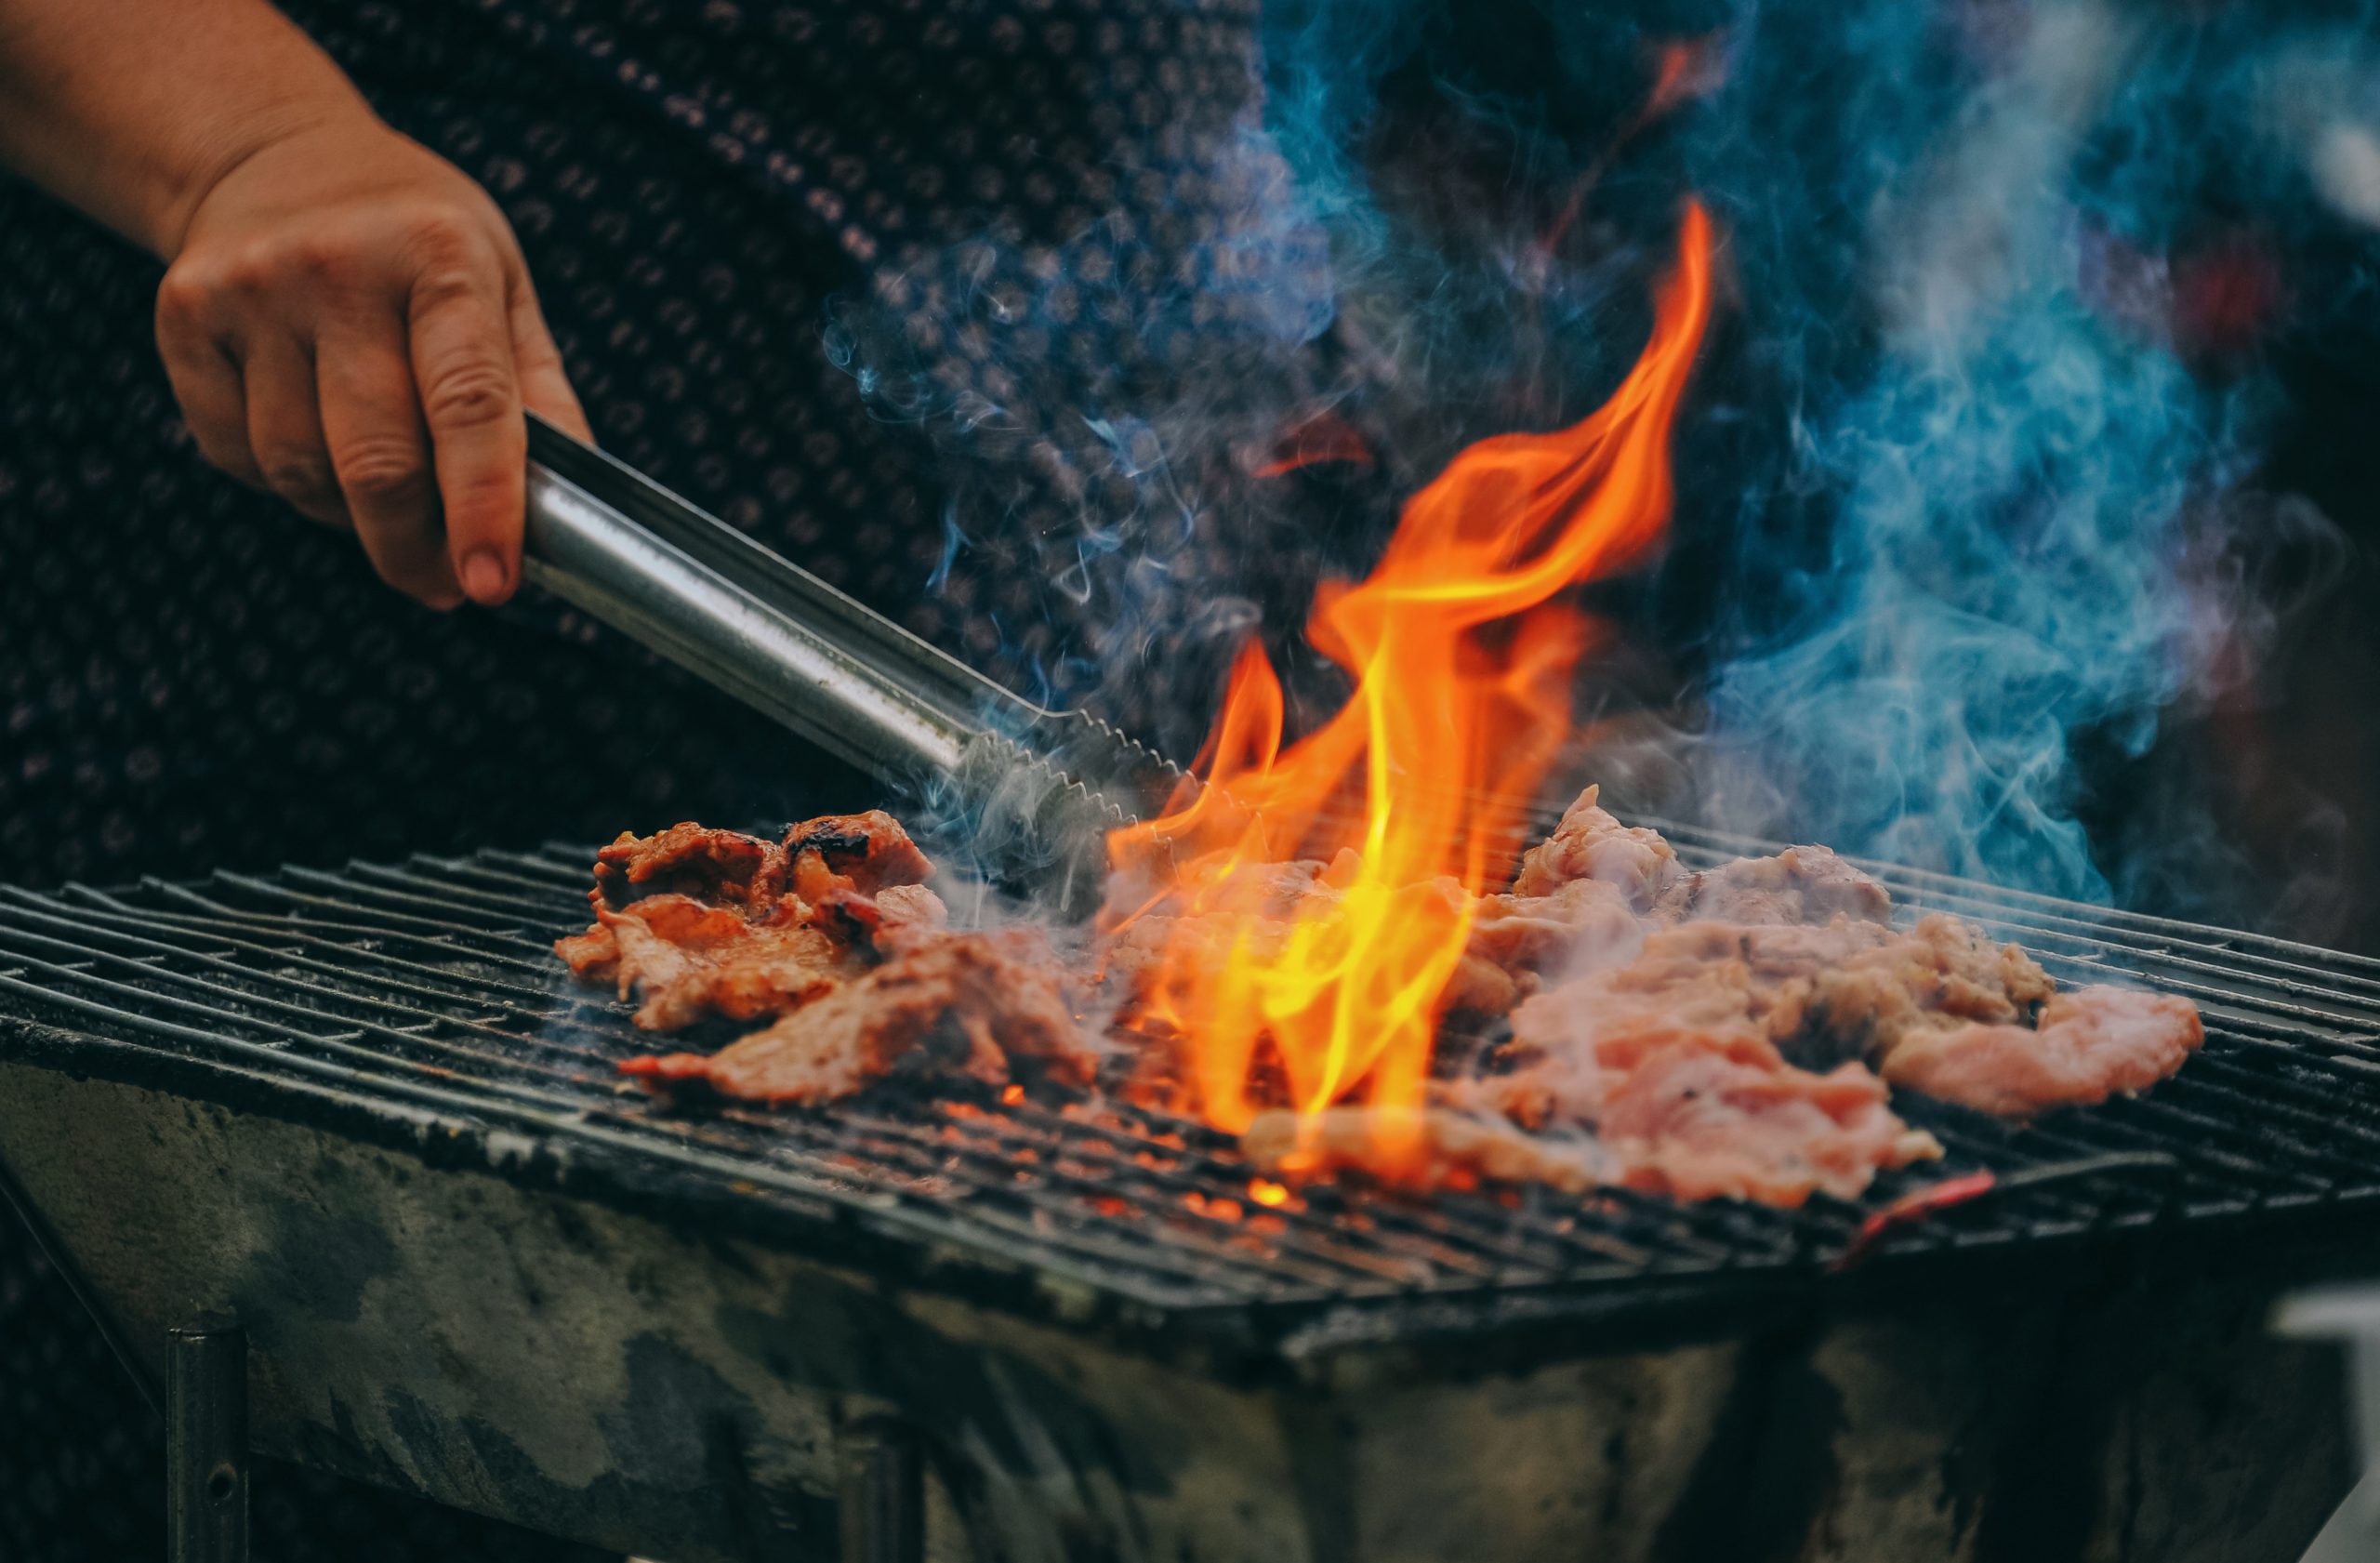 Man grilling meat on an open fire grill with flames coming out